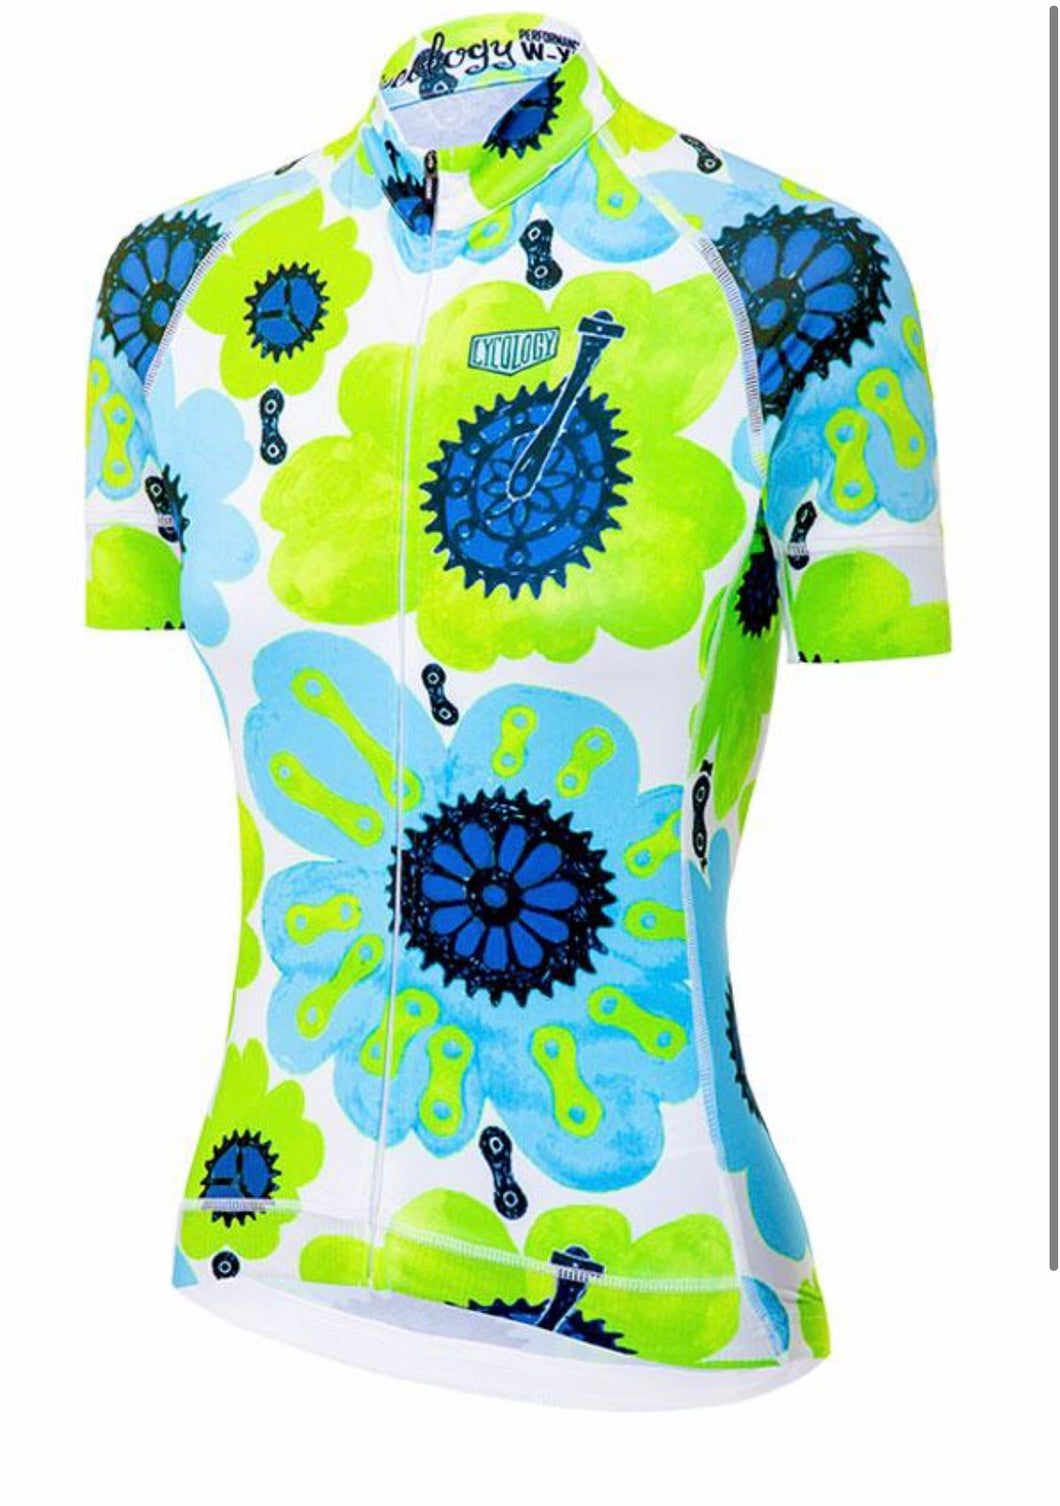 Cycology Quality Womens Jersey - Design Pedal Flower Blue & Green